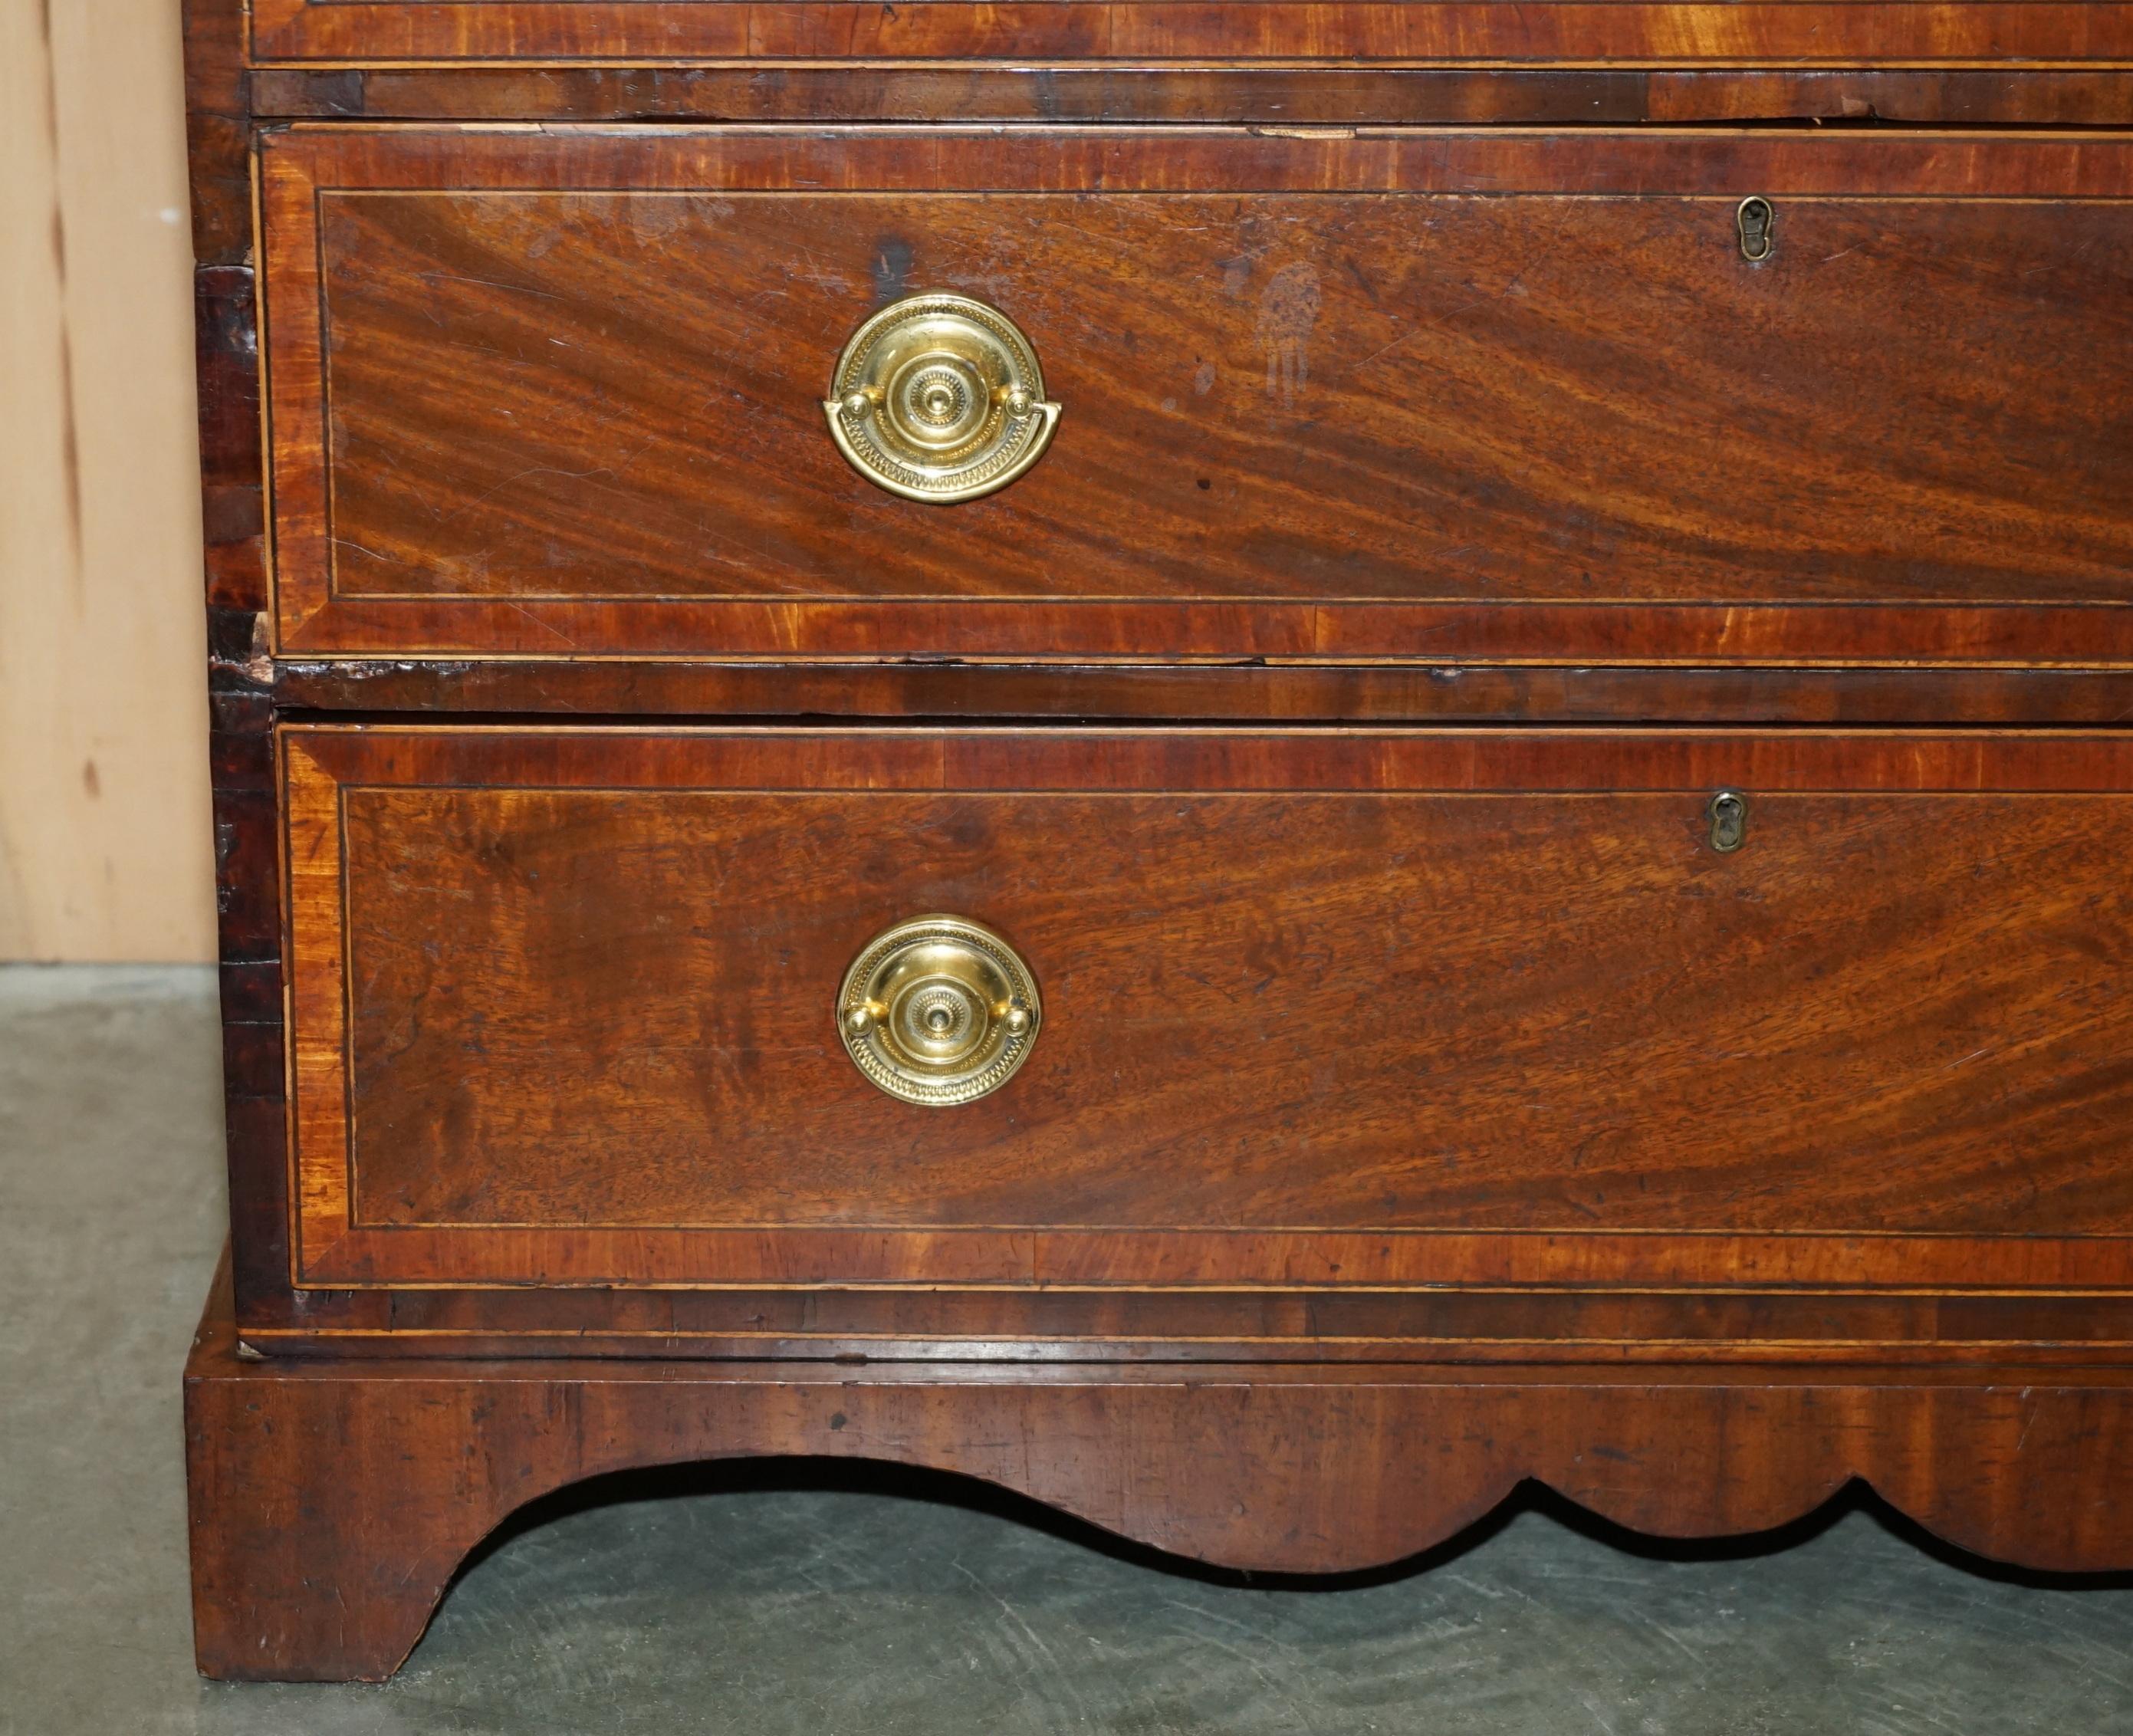 ANTiQUE GEORGE III BACHELORS CHEST OF DRAWERS ATTRIBUTED TO GILLOWS OF LANCASTER (Hartholz) im Angebot